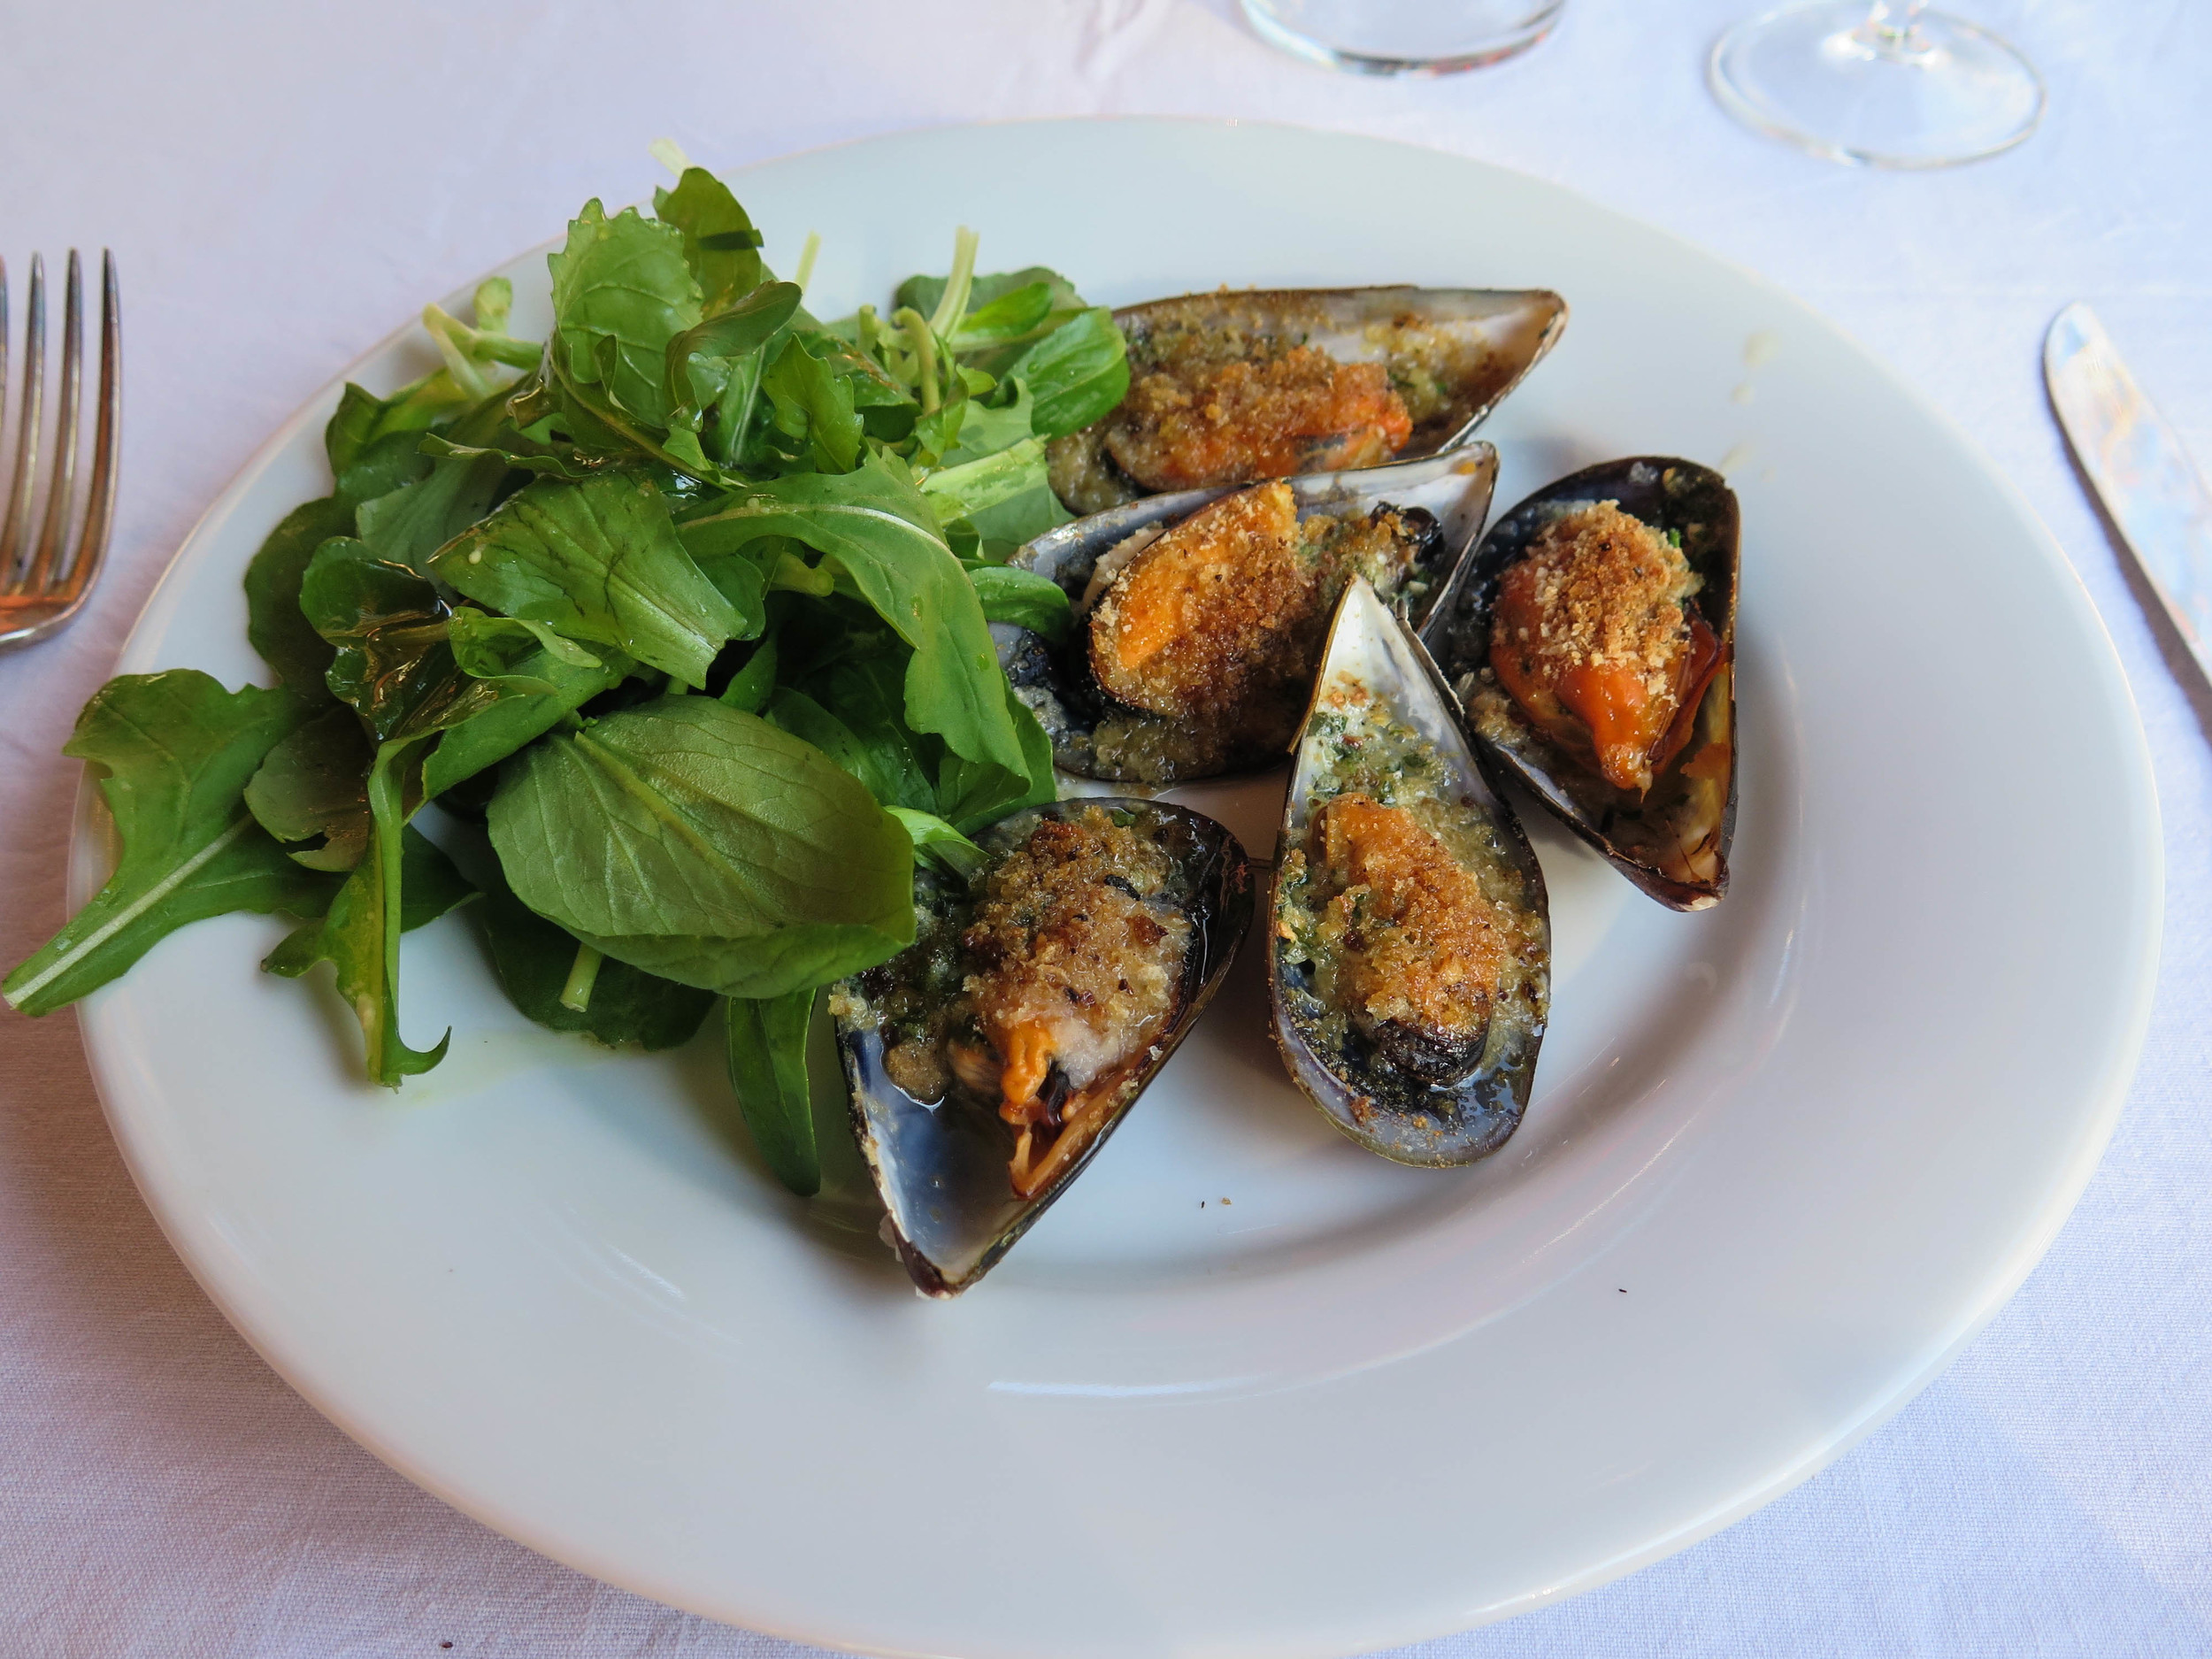 2nd course - baked mussels